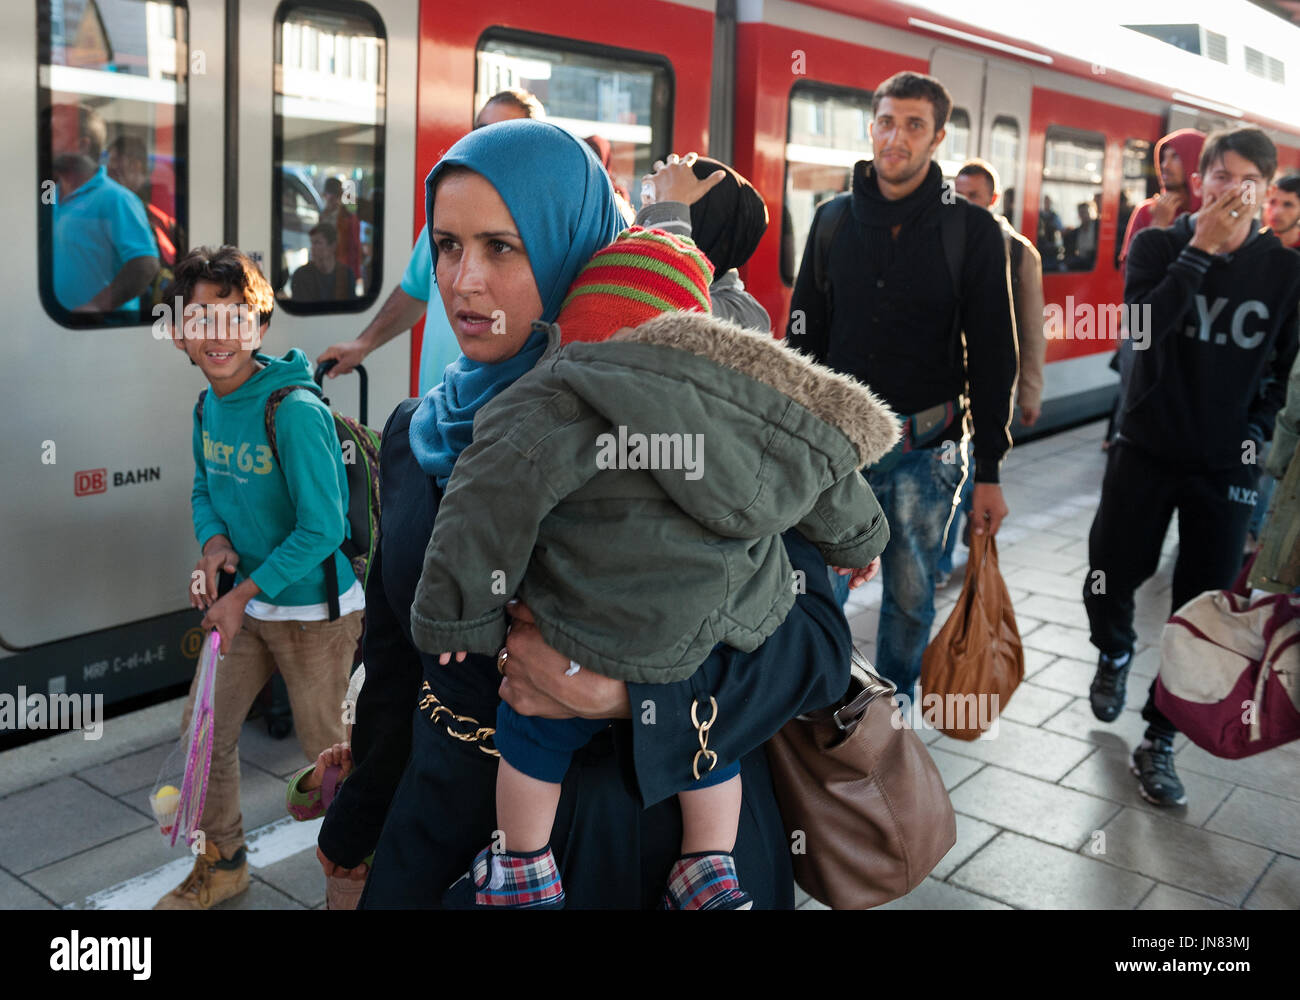 Munich, Germany - September 10th, 2015: Mother and daughter from Syria arriving in Munich. The refugees are seeking asylum in Europe. Stock Photo